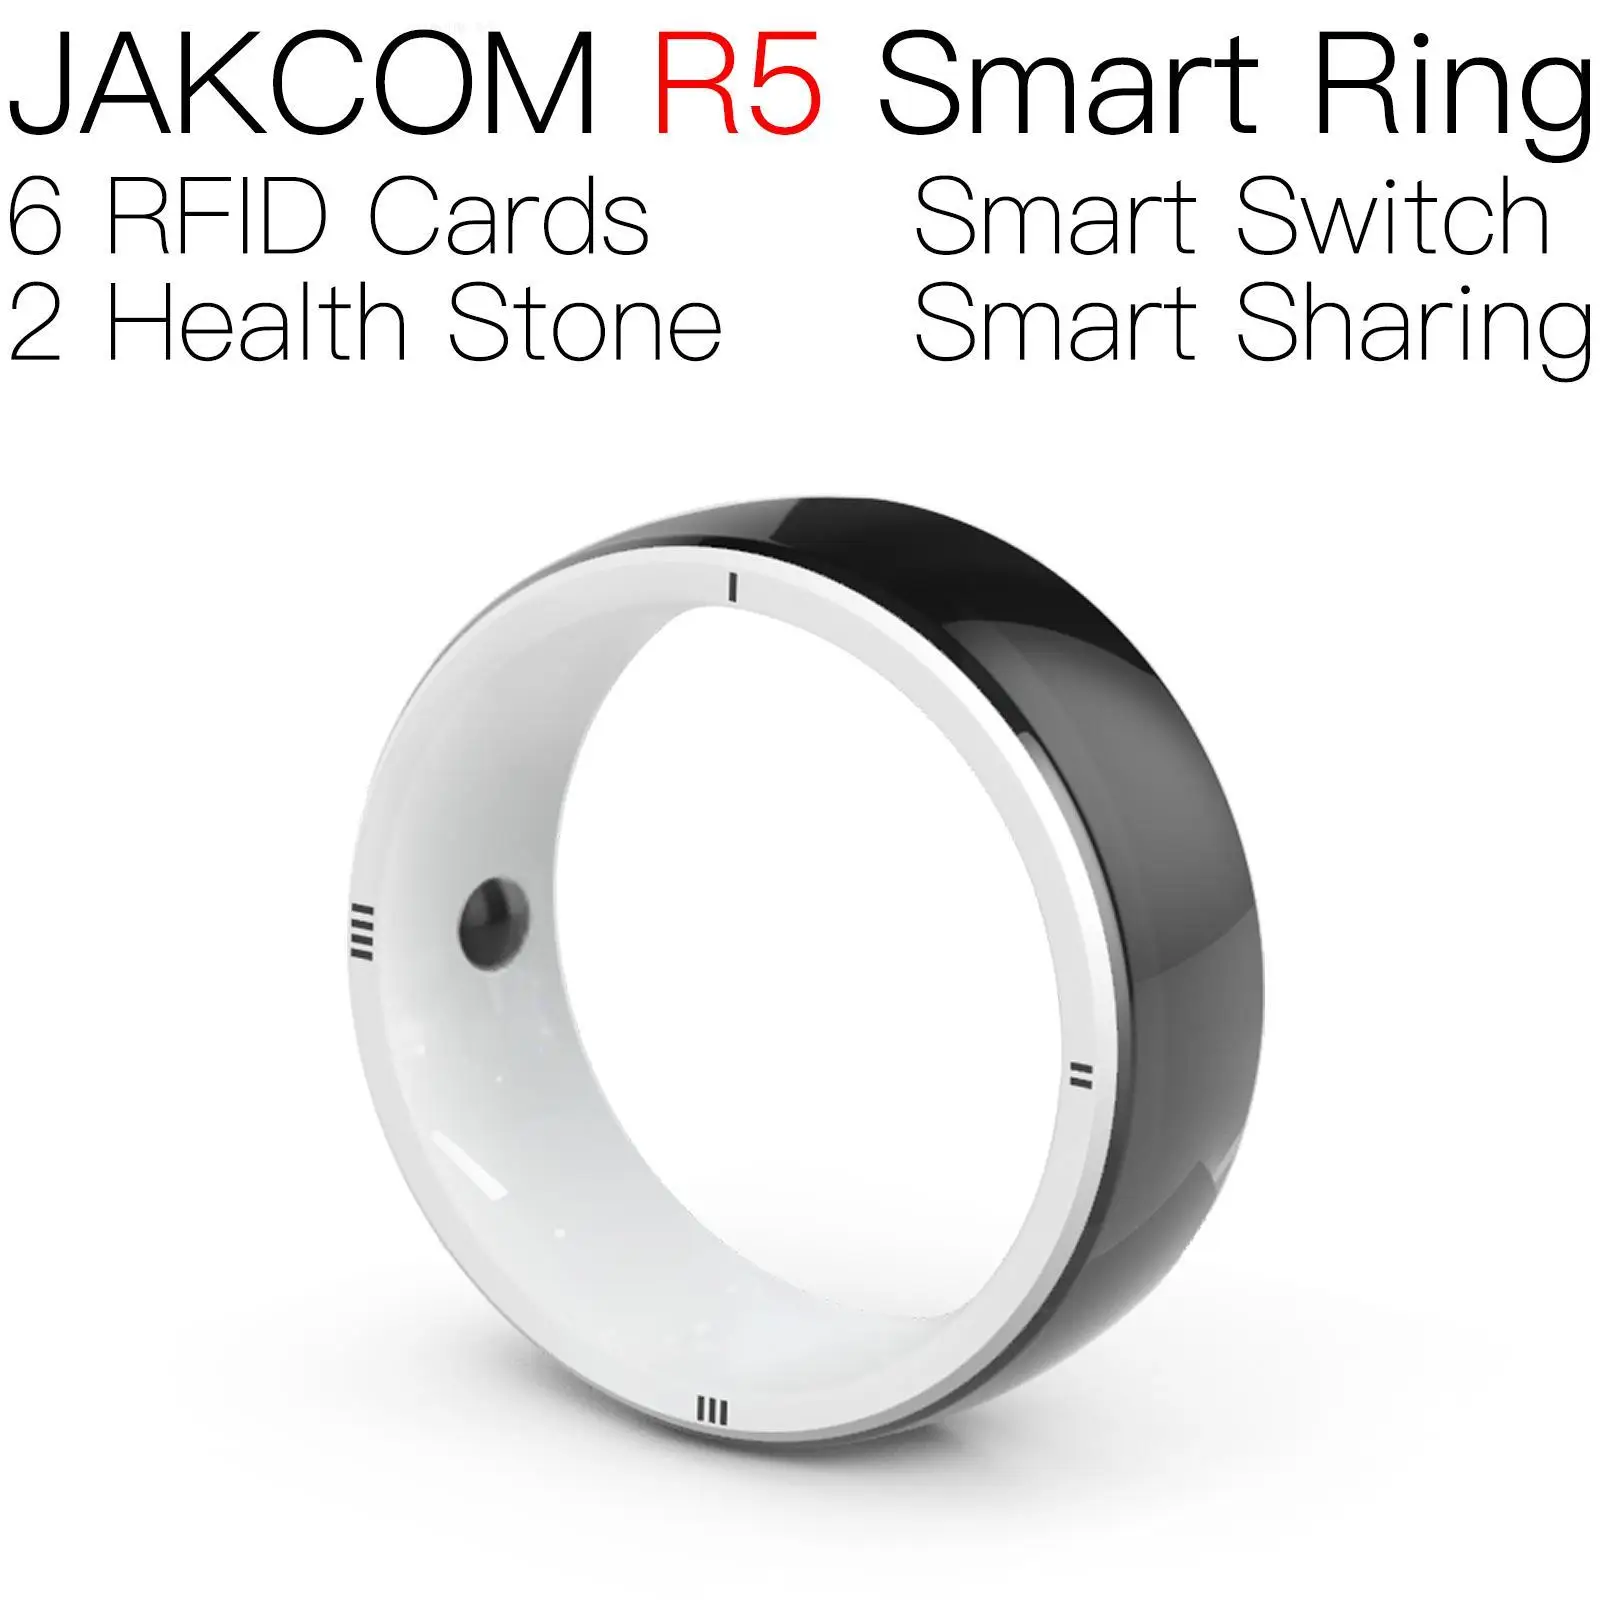 

JAKCOM R5 Smart Ring For men women rfid chip glas mhz dual frequency nfc classic 1k s50 and h3 card 125khz rewritable code